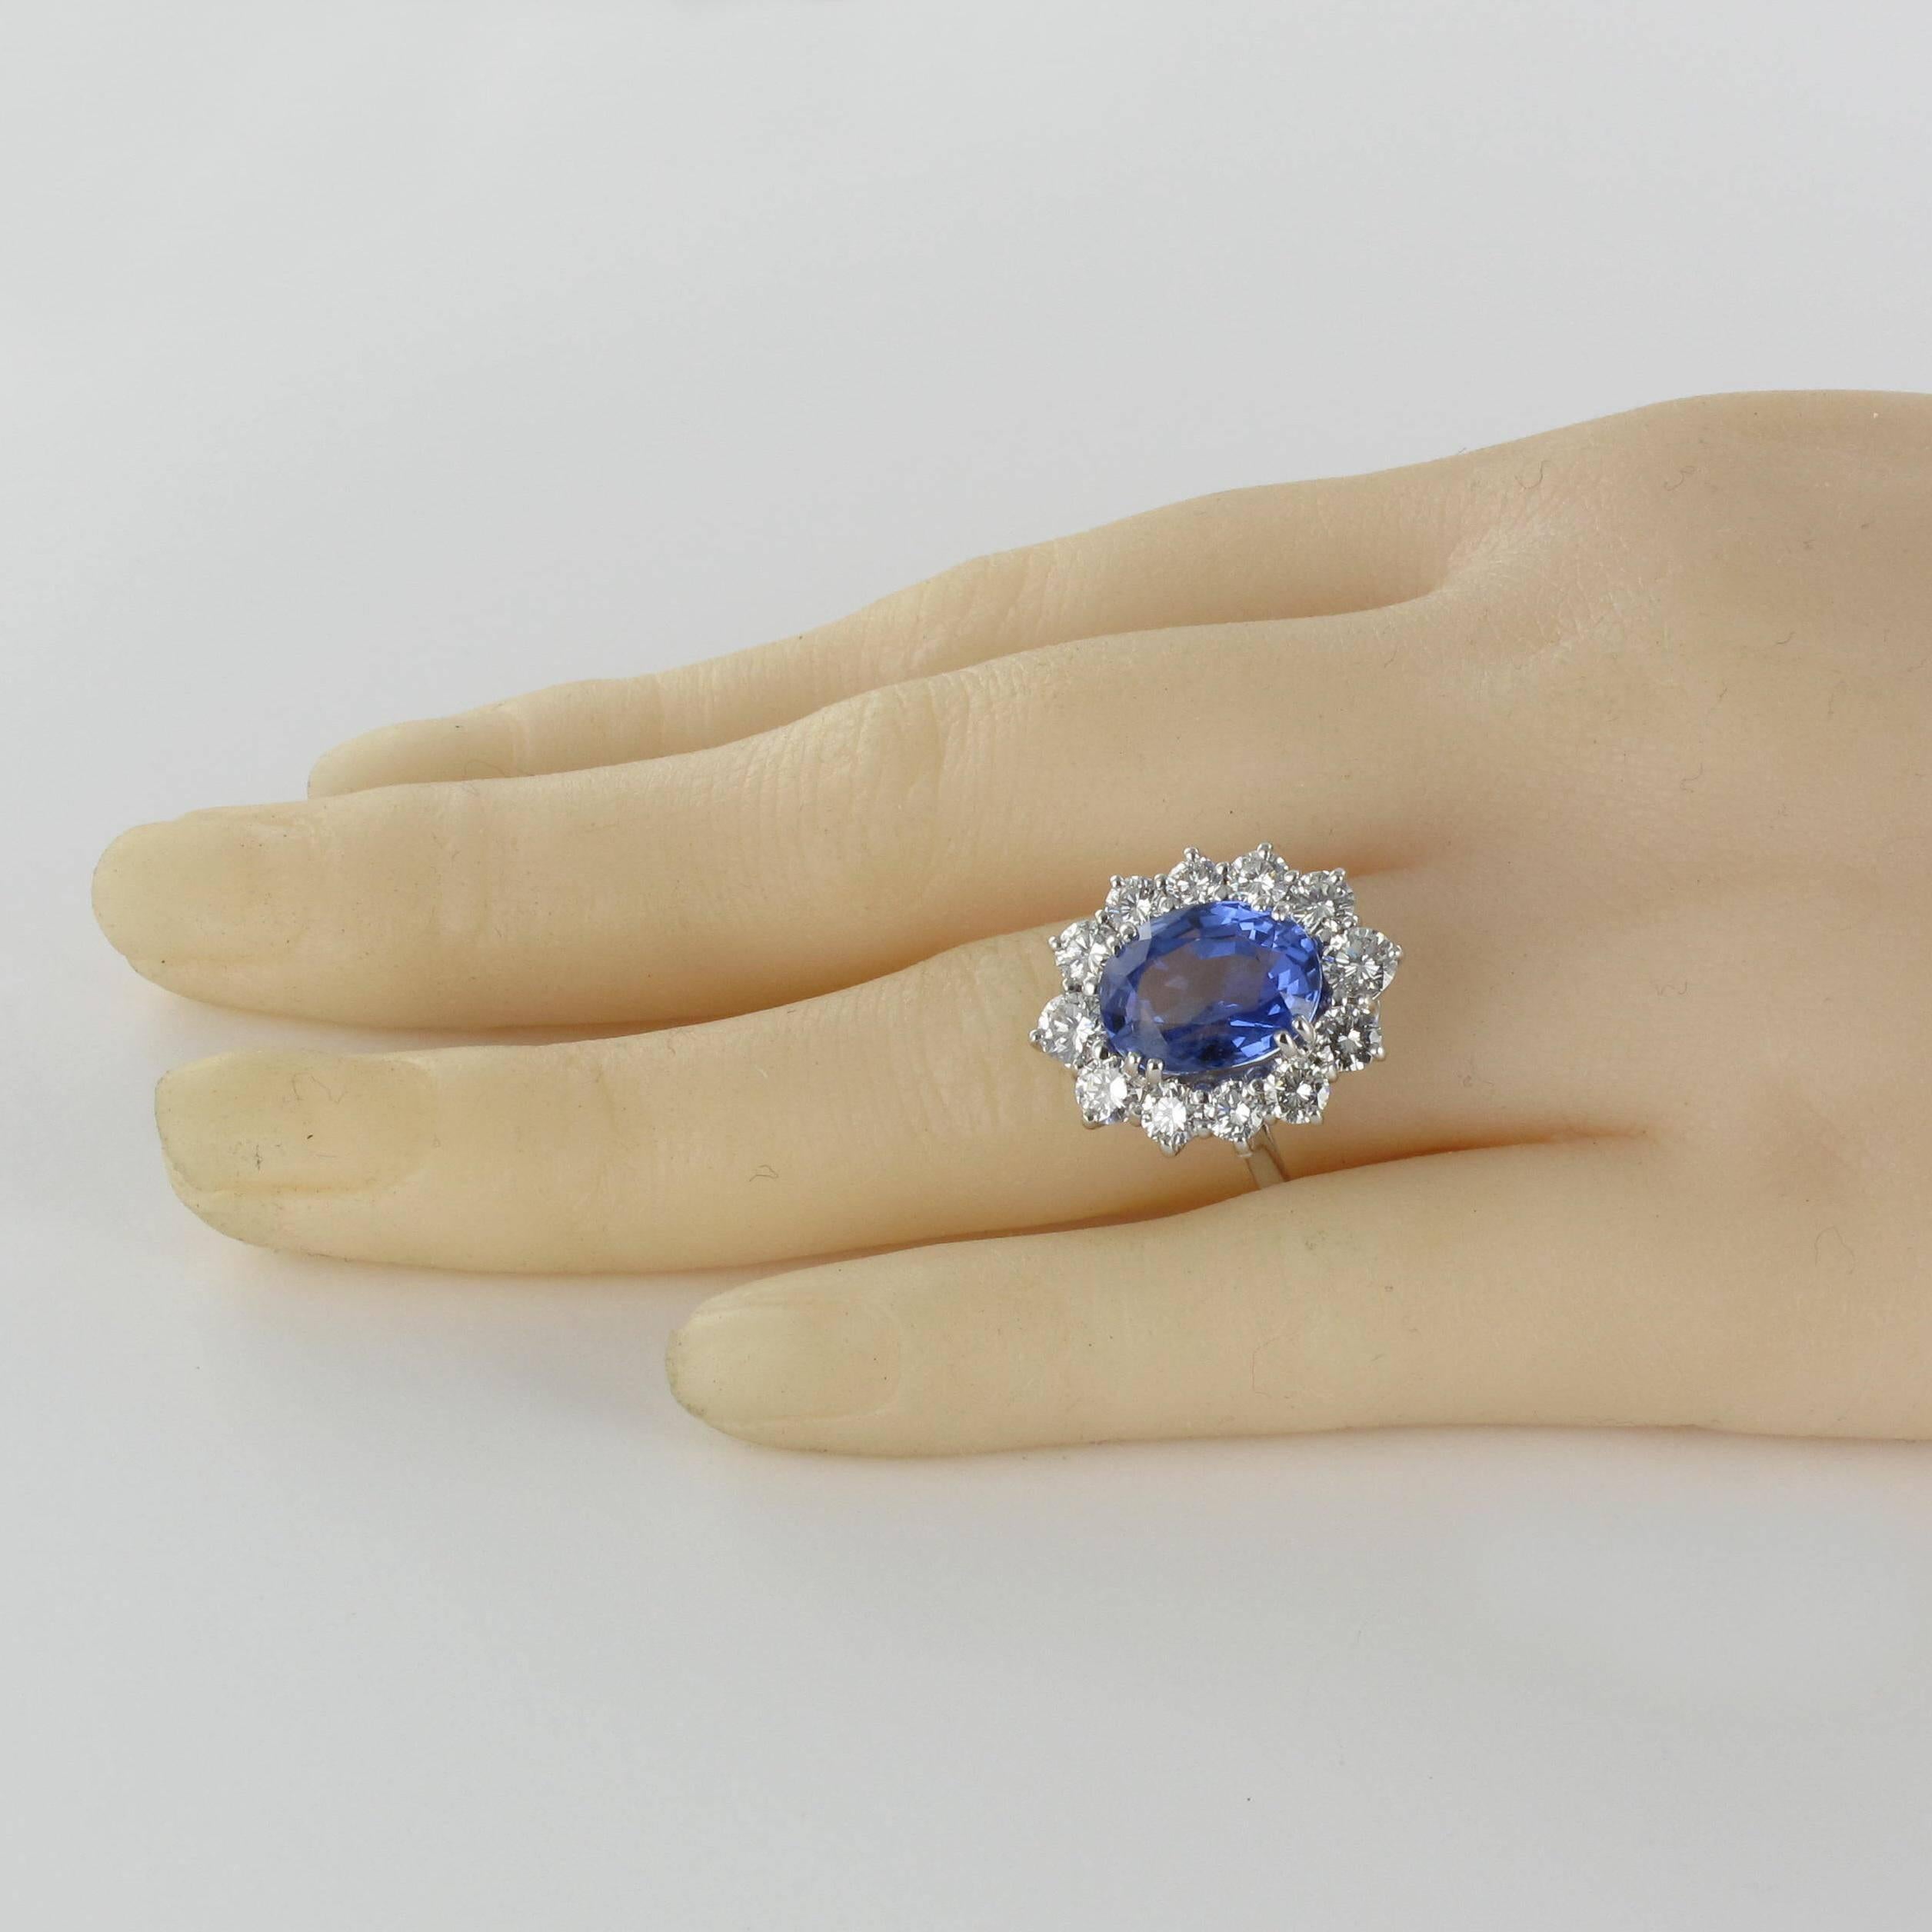 French 1960s No Heat 7.42 Carat Ceylon Sapphire Diamond White Gold Cluster Ring For Sale 11